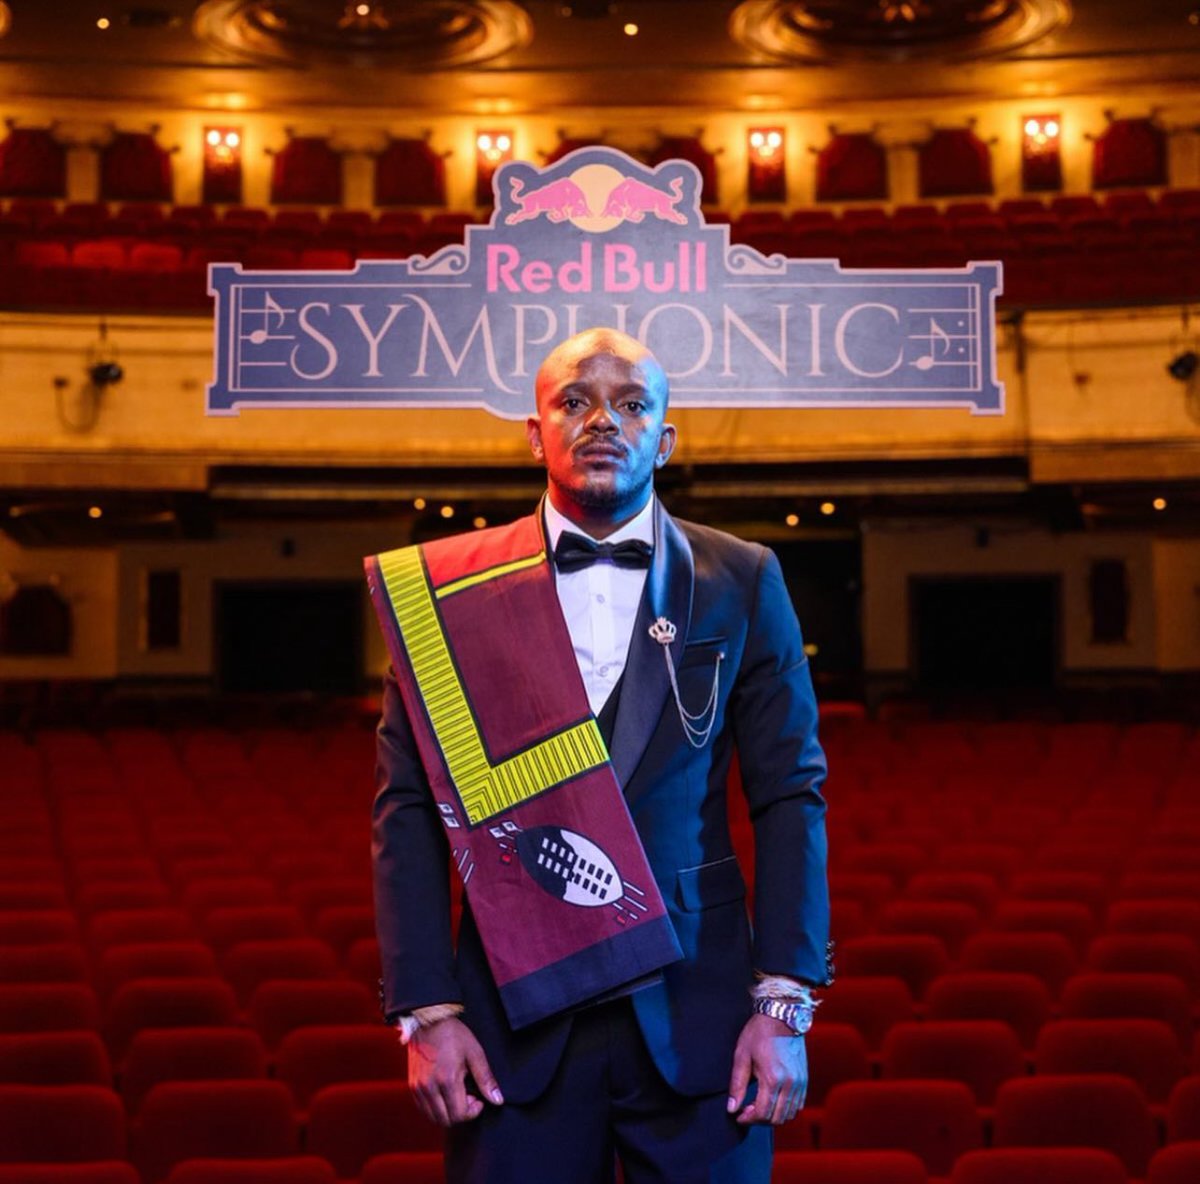 Kabza De Small leads the way in a groundbreaking event with the first African Red Bull Symphonic Show! This unique experience blends Kabza De Small's famous Amapiano tunes with a full classical orchestra conducted by the talented Ofentse Pitse.